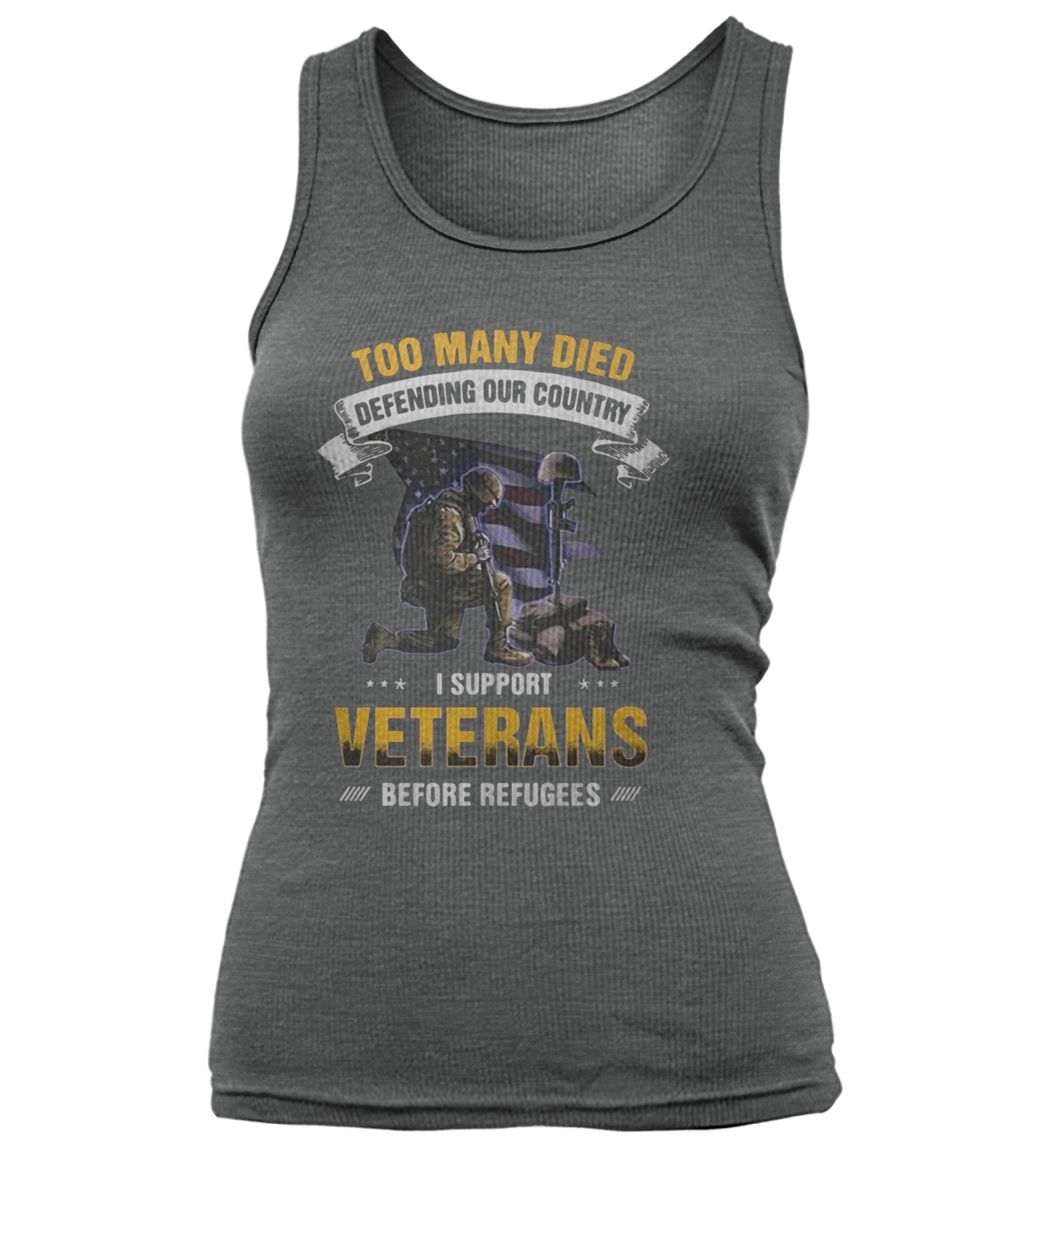 Too many died defending our country I support veterans before refugees women's tank top